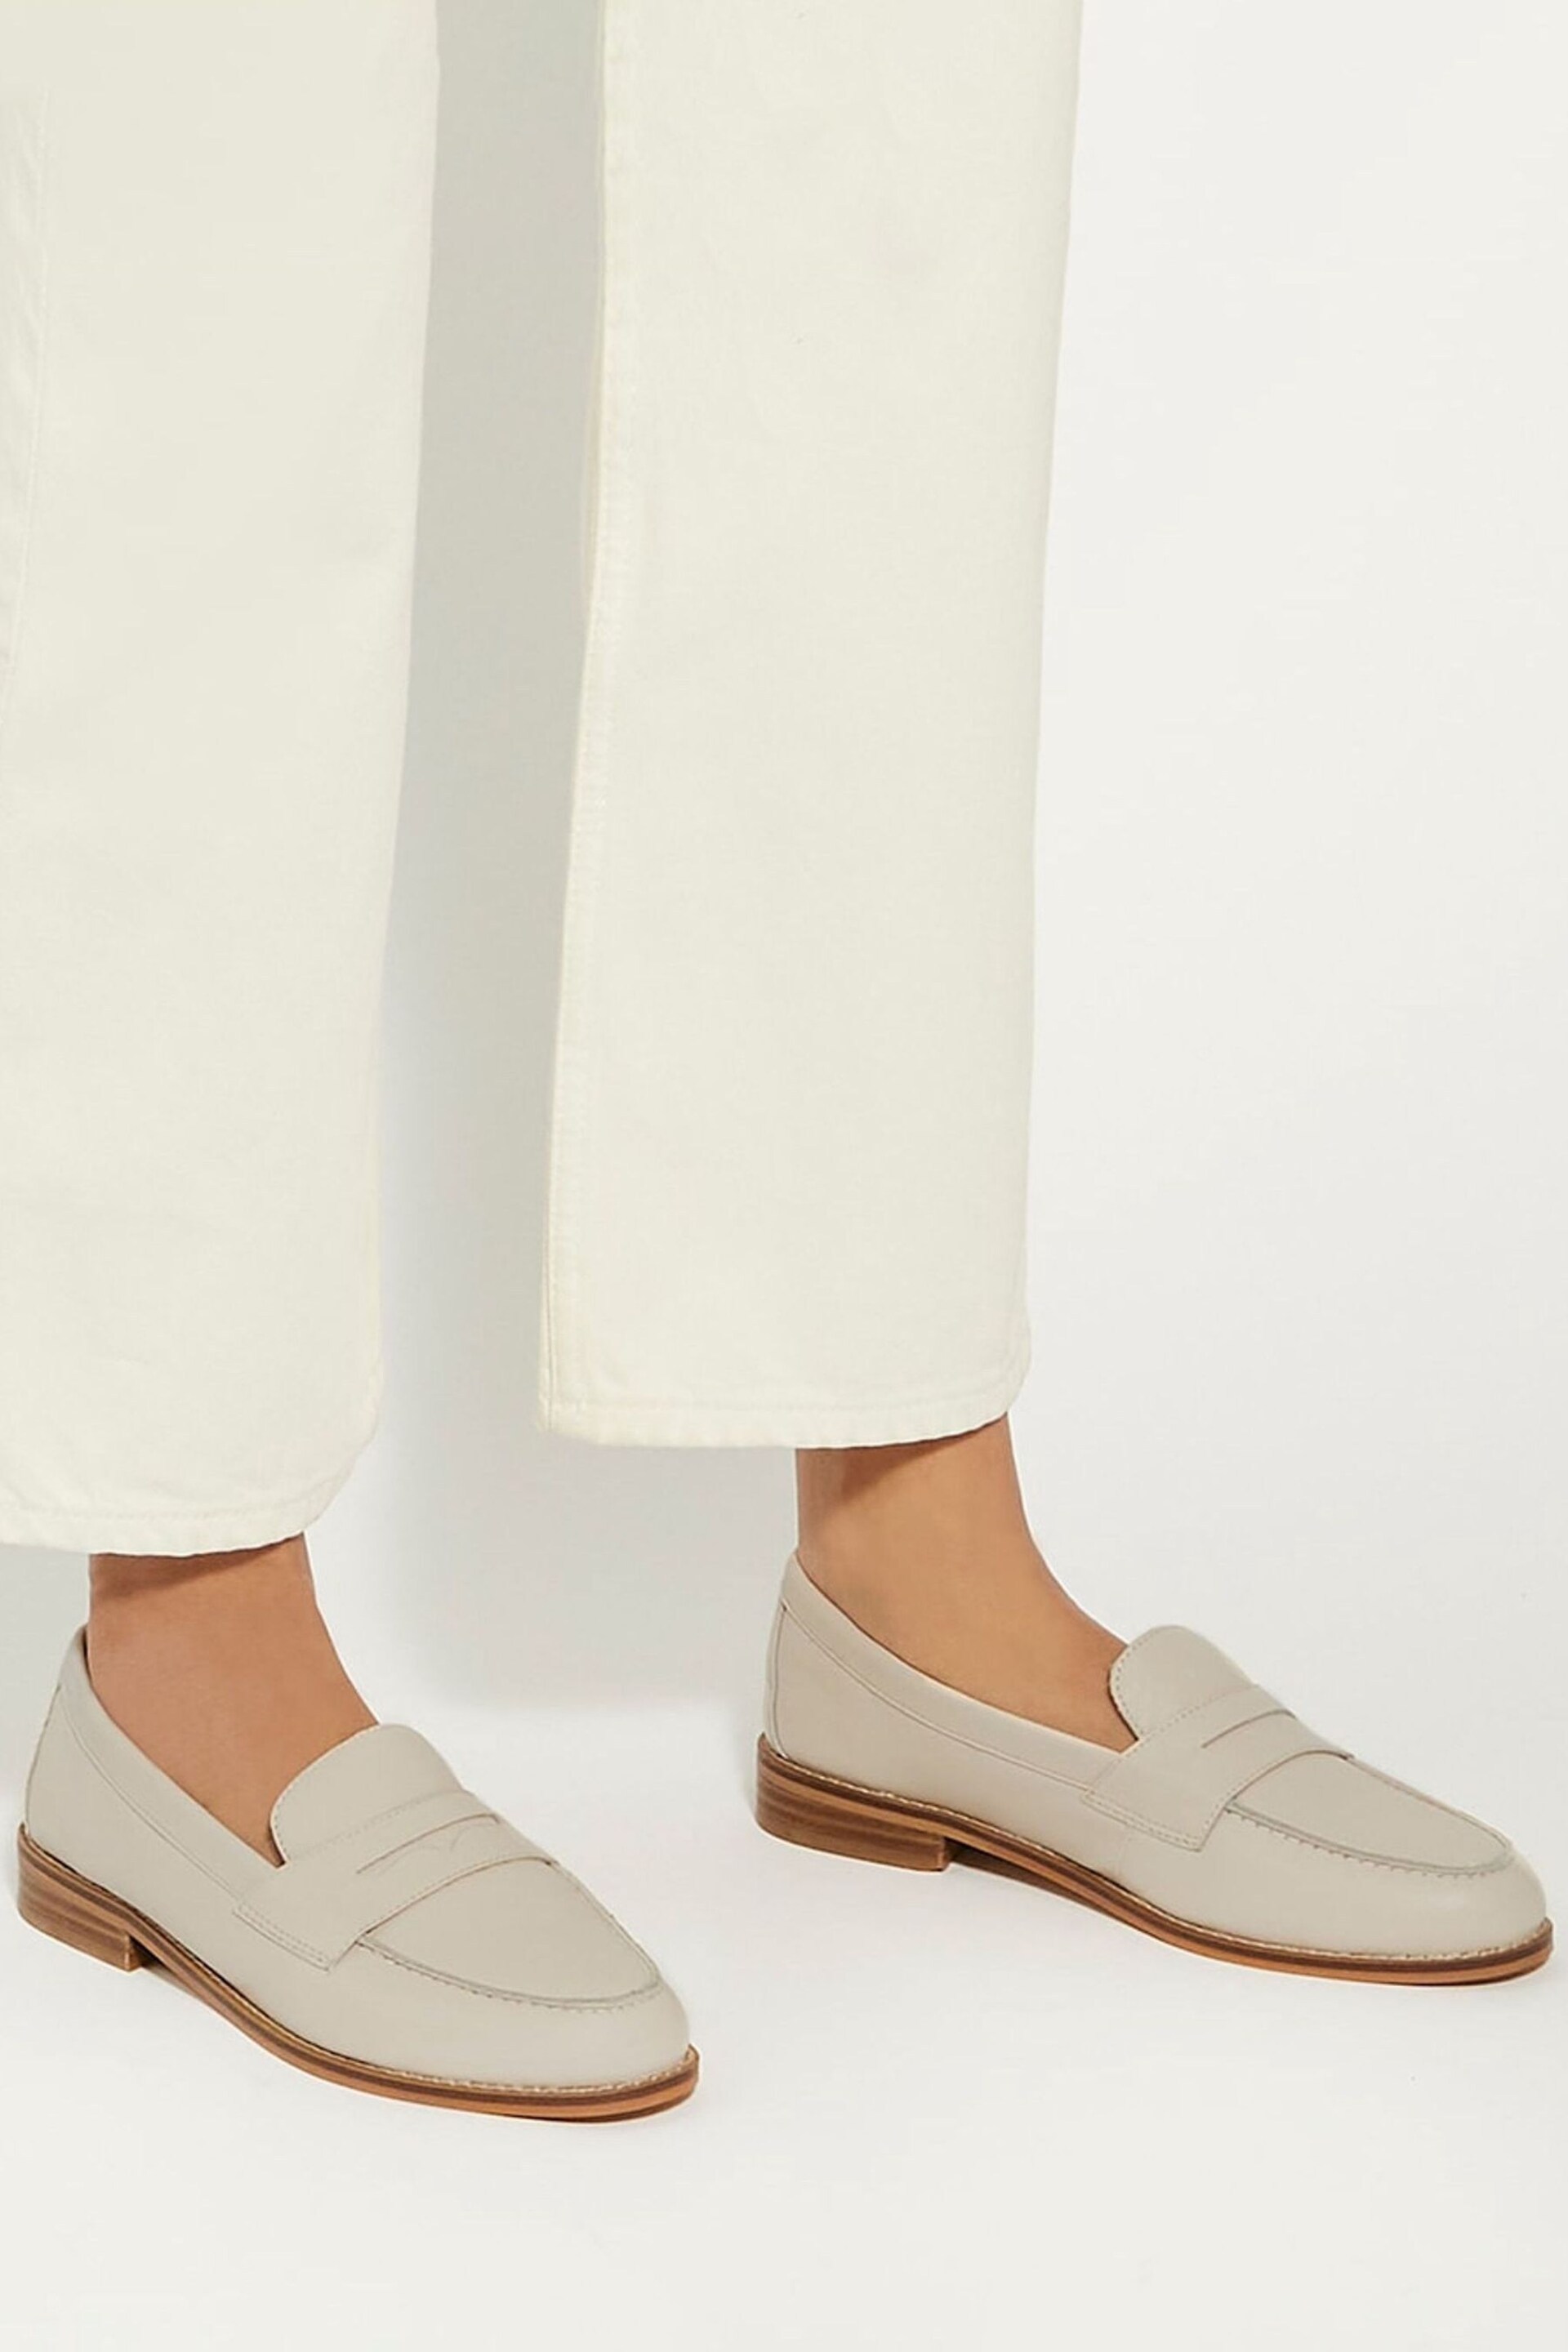 Dune London Cream Ginelli Flexi Sole Penny Loafers - Image 1 of 6